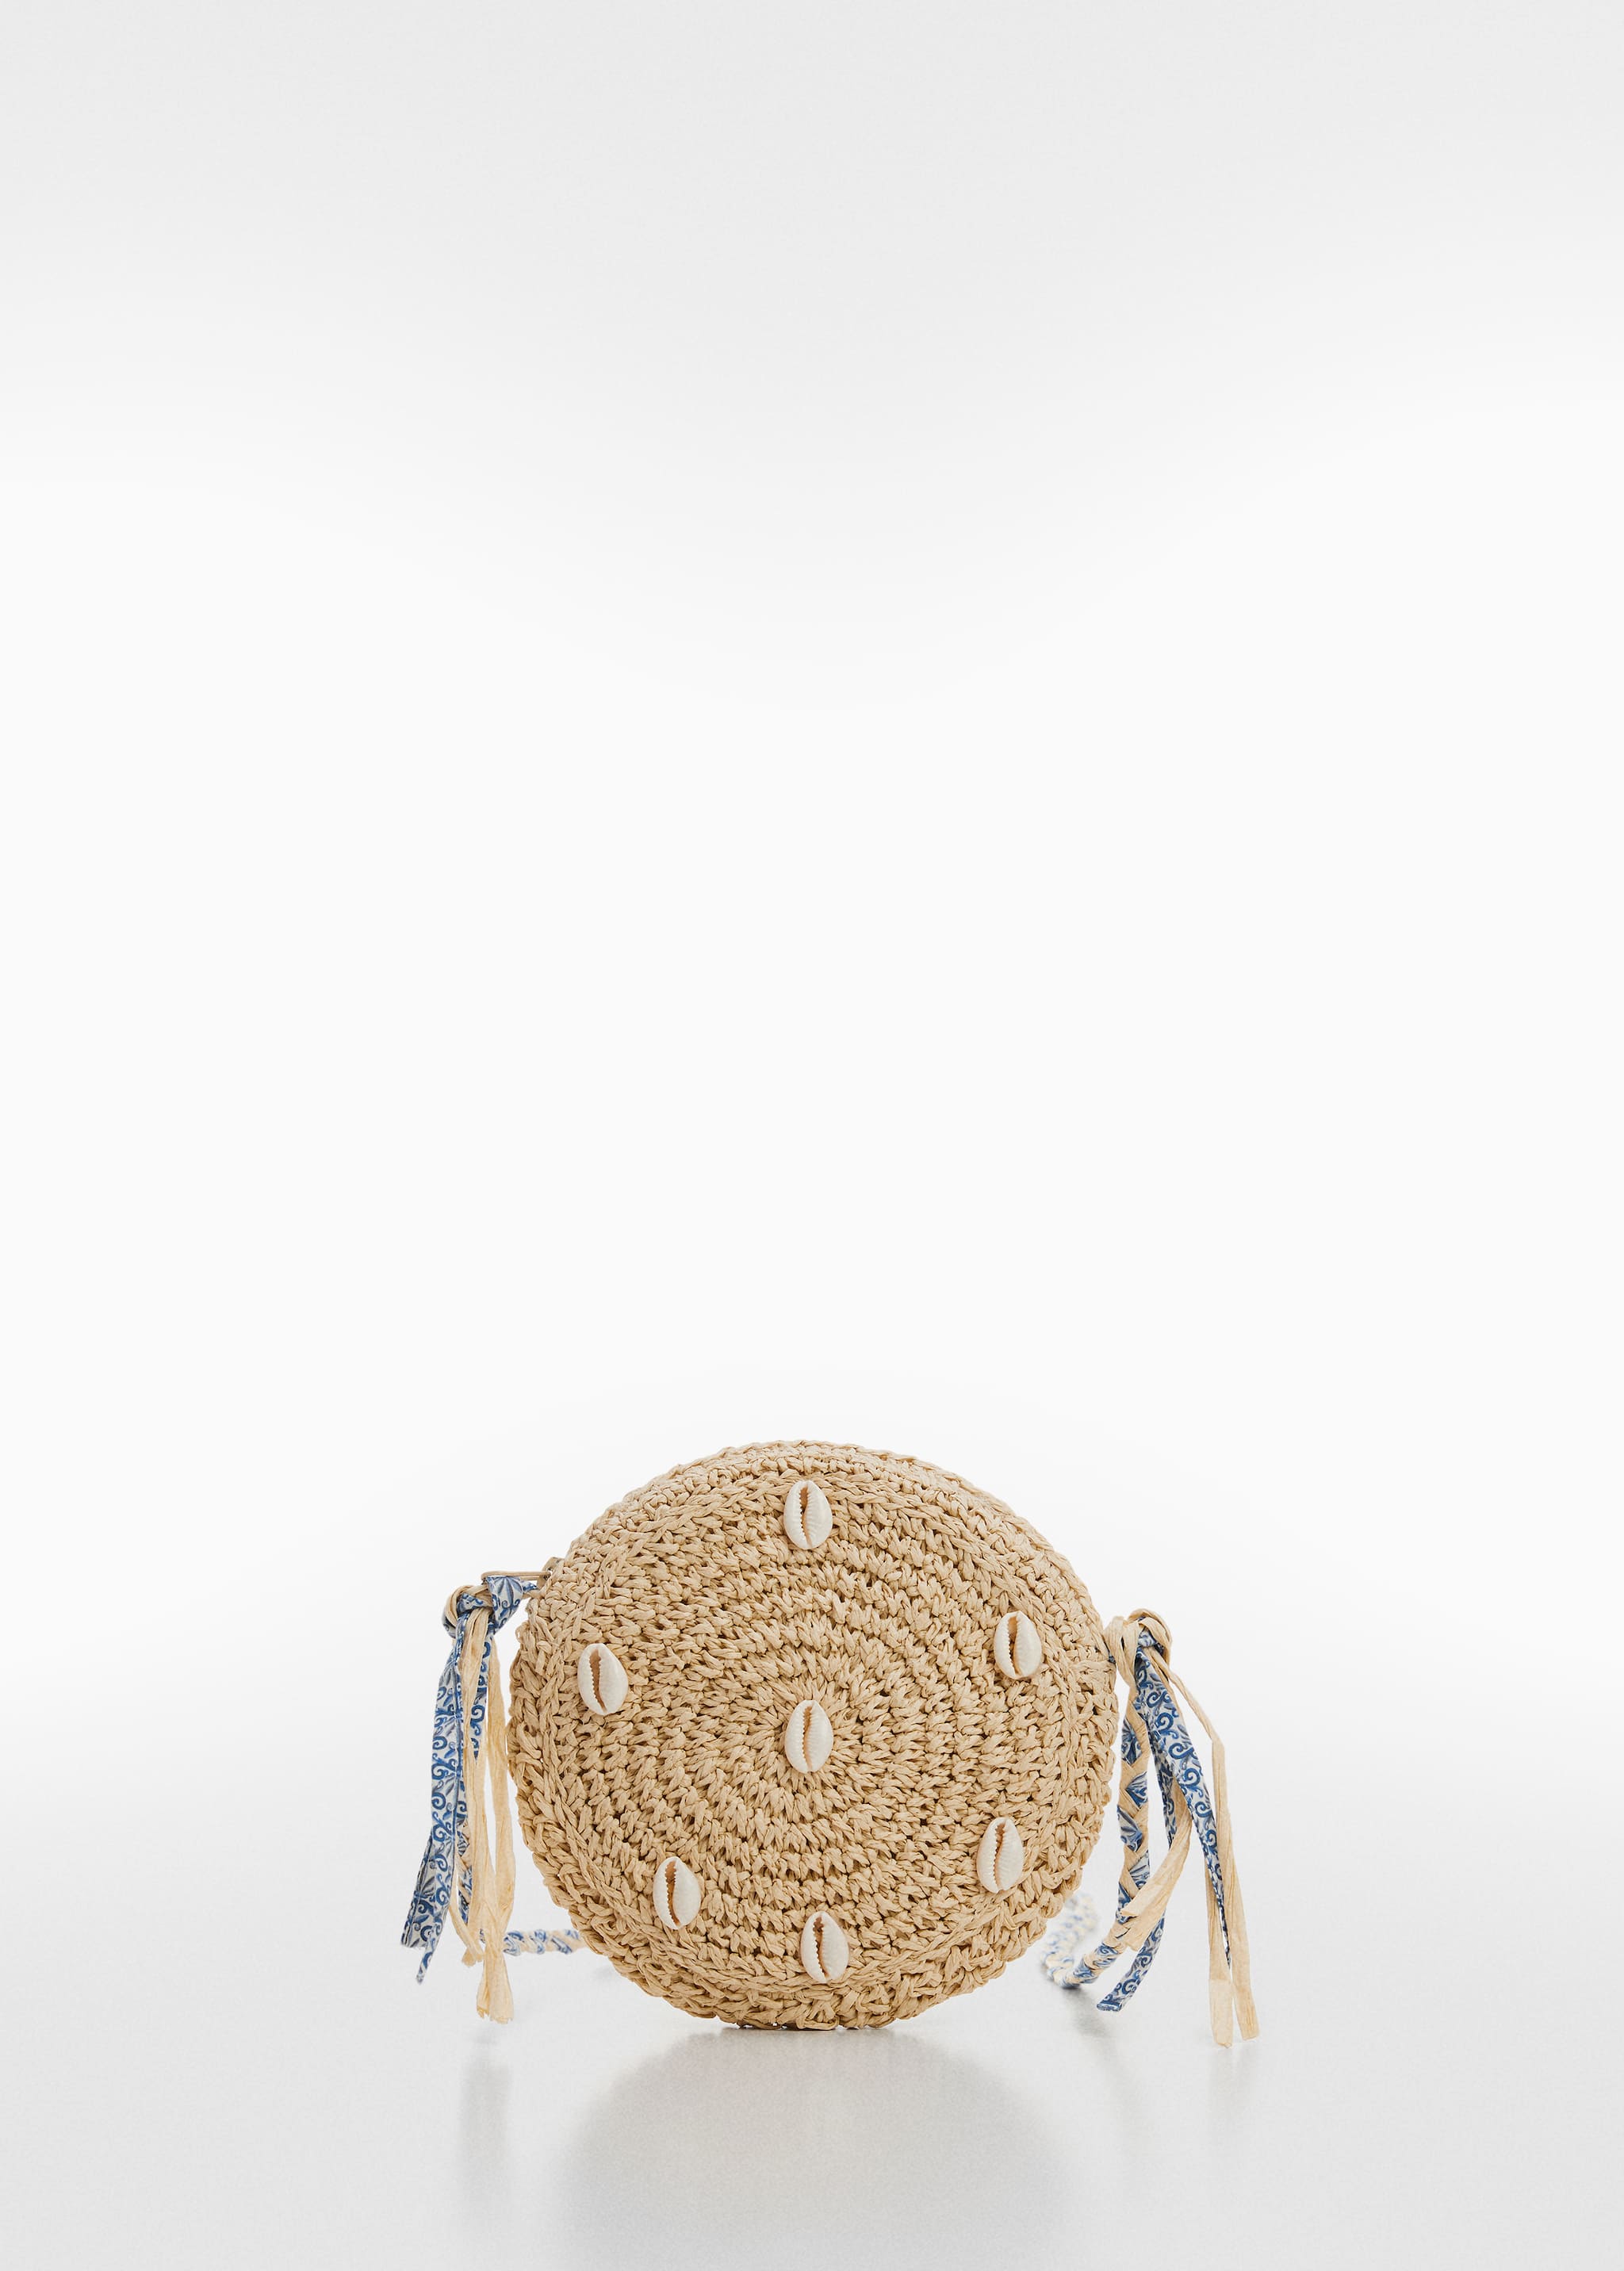 Shell straw bag - Article without model